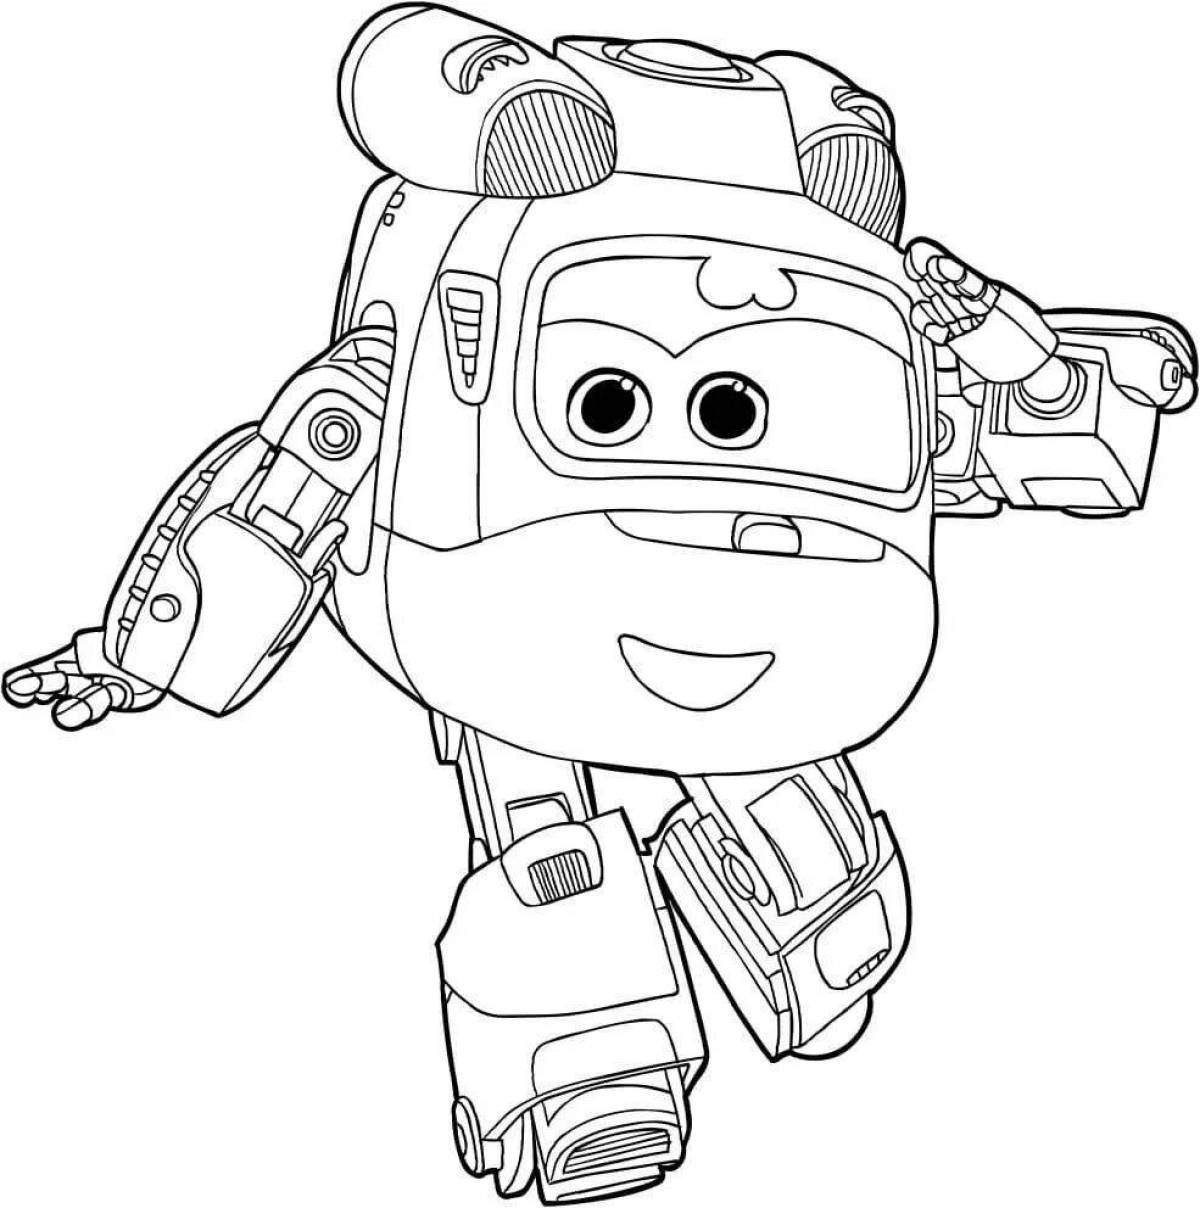 Glowing Donnie super wings coloring page